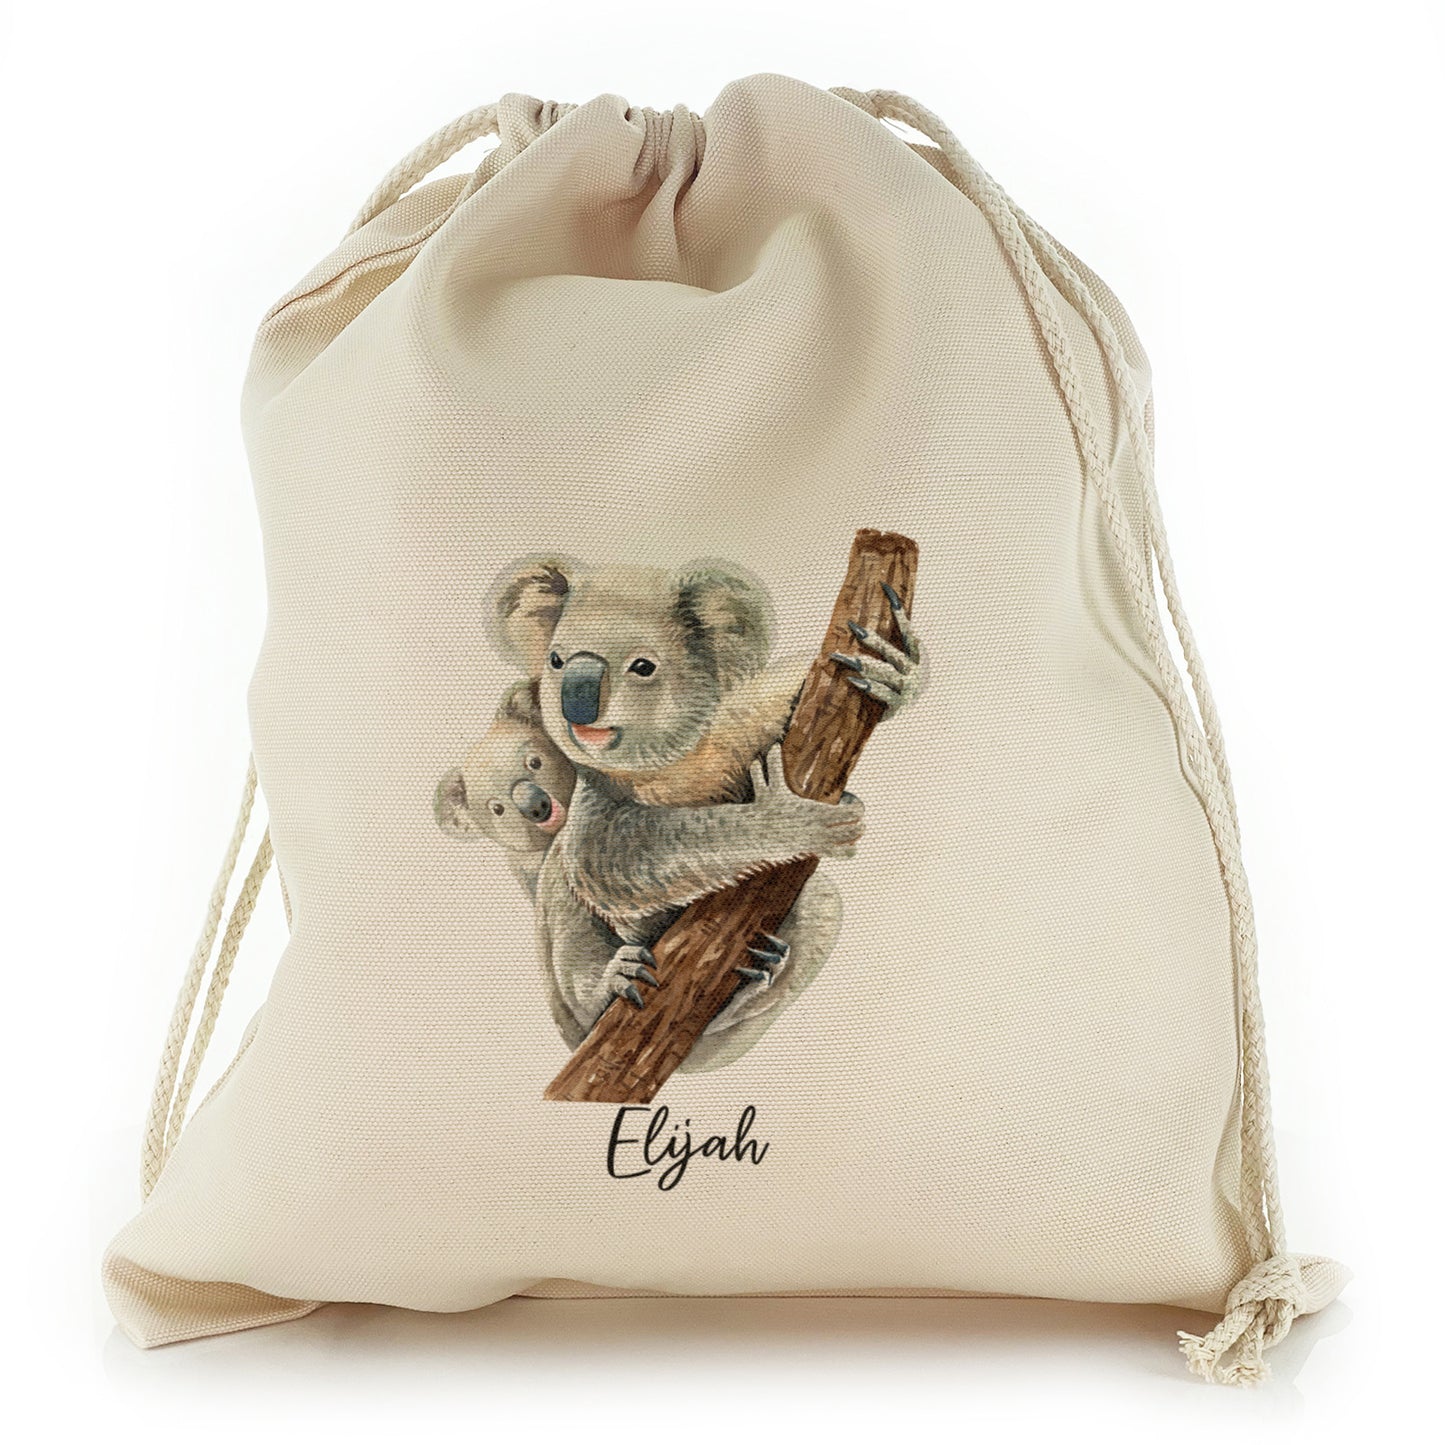 Personalised Canvas Sack with Welcoming Text and Climbing Mum and Baby Koalas